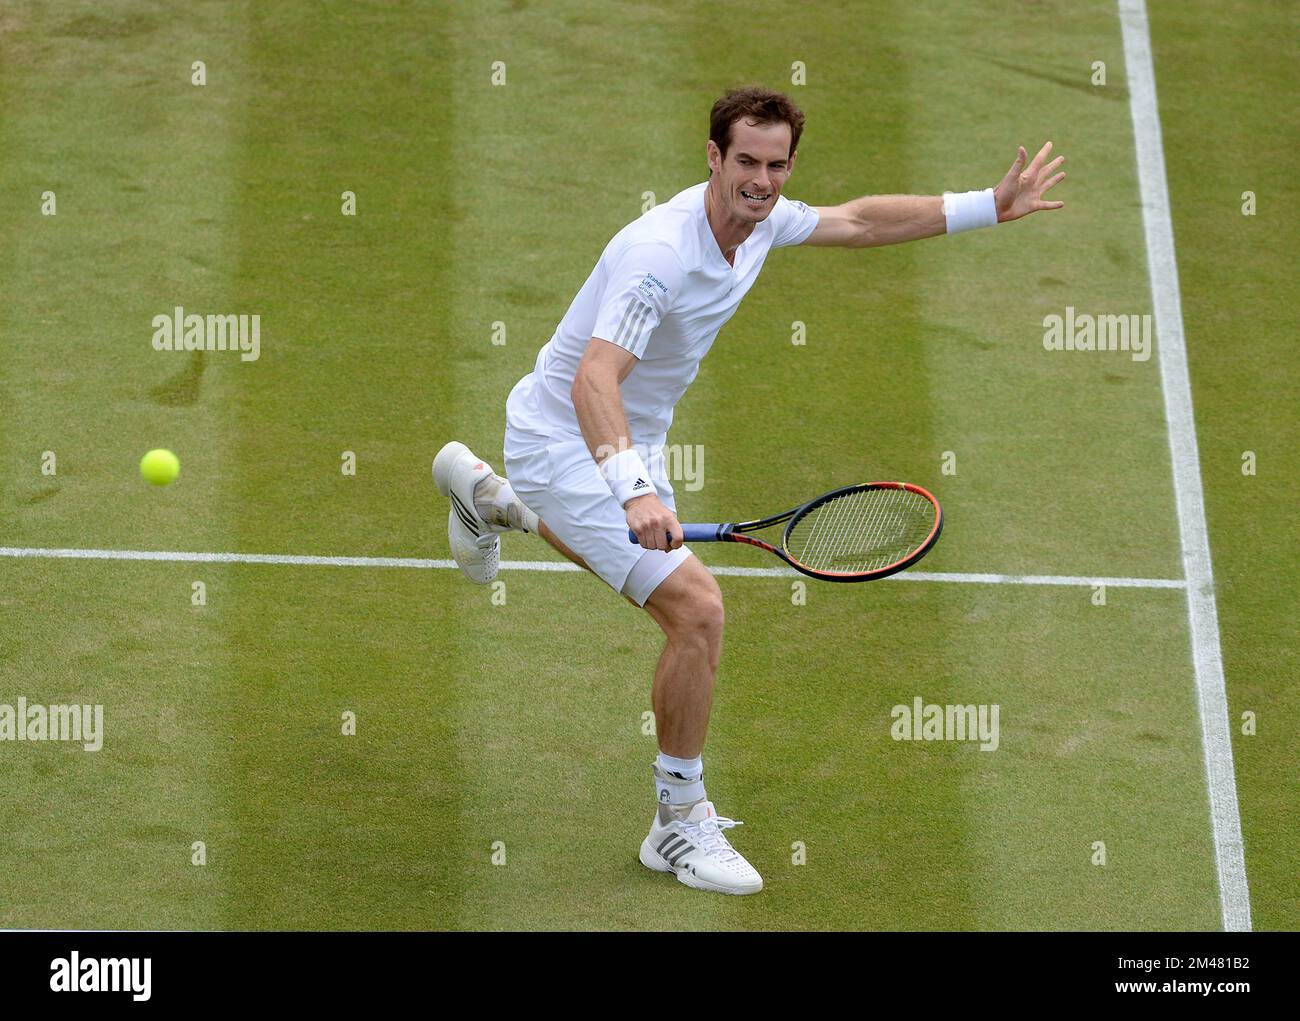 Andy Murray, Wimbledon tennis Championships 2014, Wimbledon London. Hommes célibataires 2nd Round Match, Andy Murray (GB) (3) v Blaž Rola (Slo) No1 court. Banque D'Images